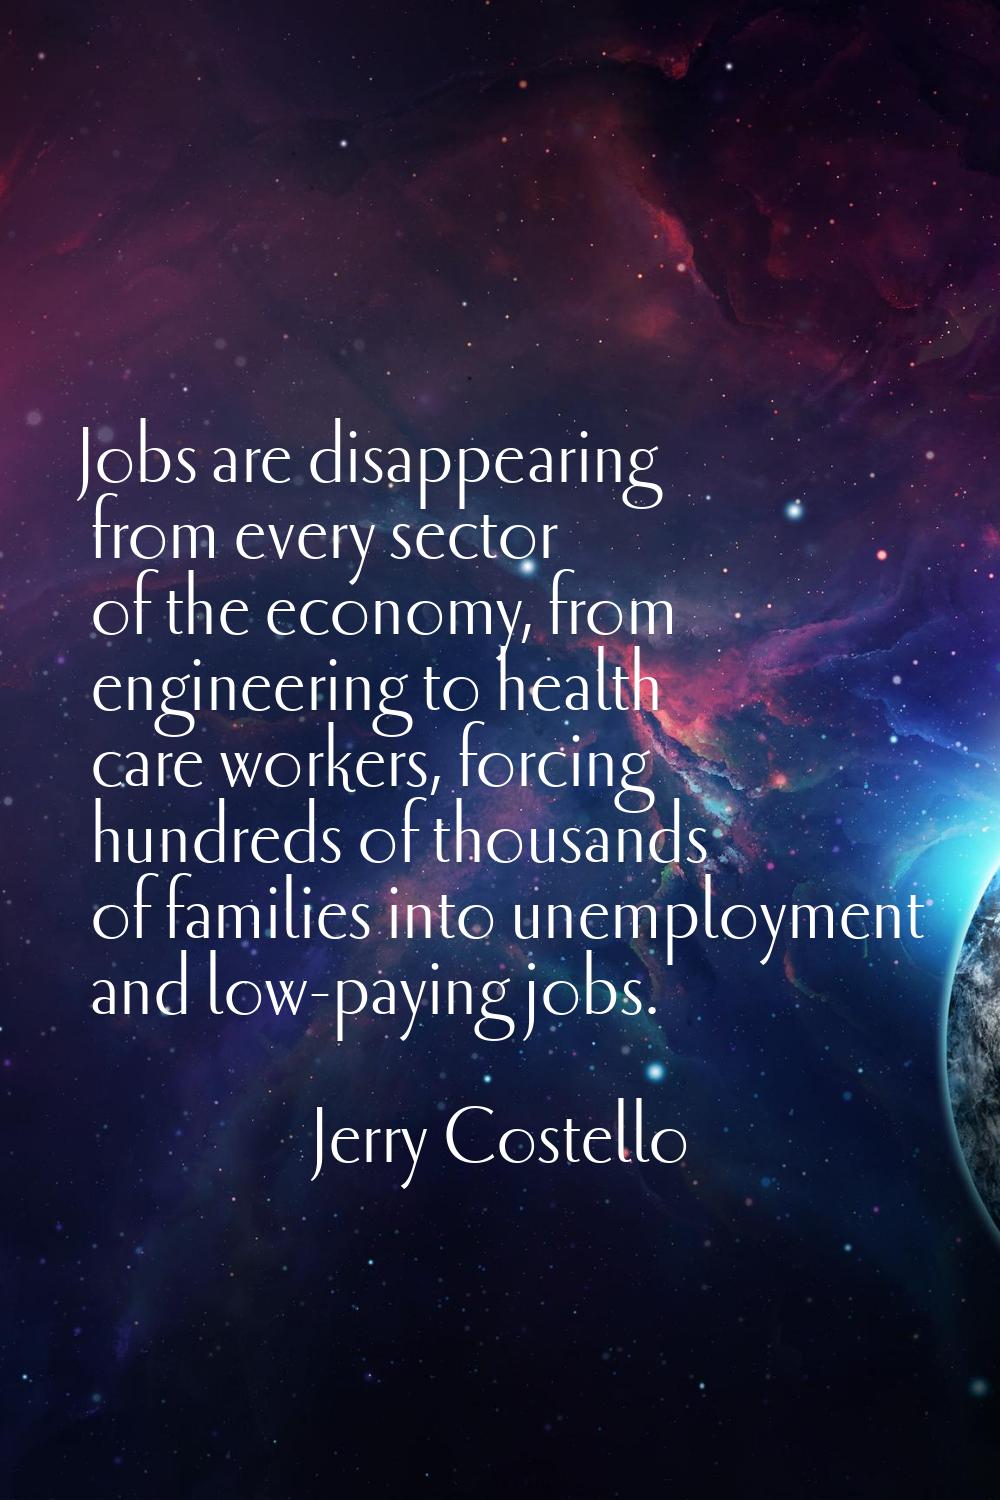 Jobs are disappearing from every sector of the economy, from engineering to health care workers, fo